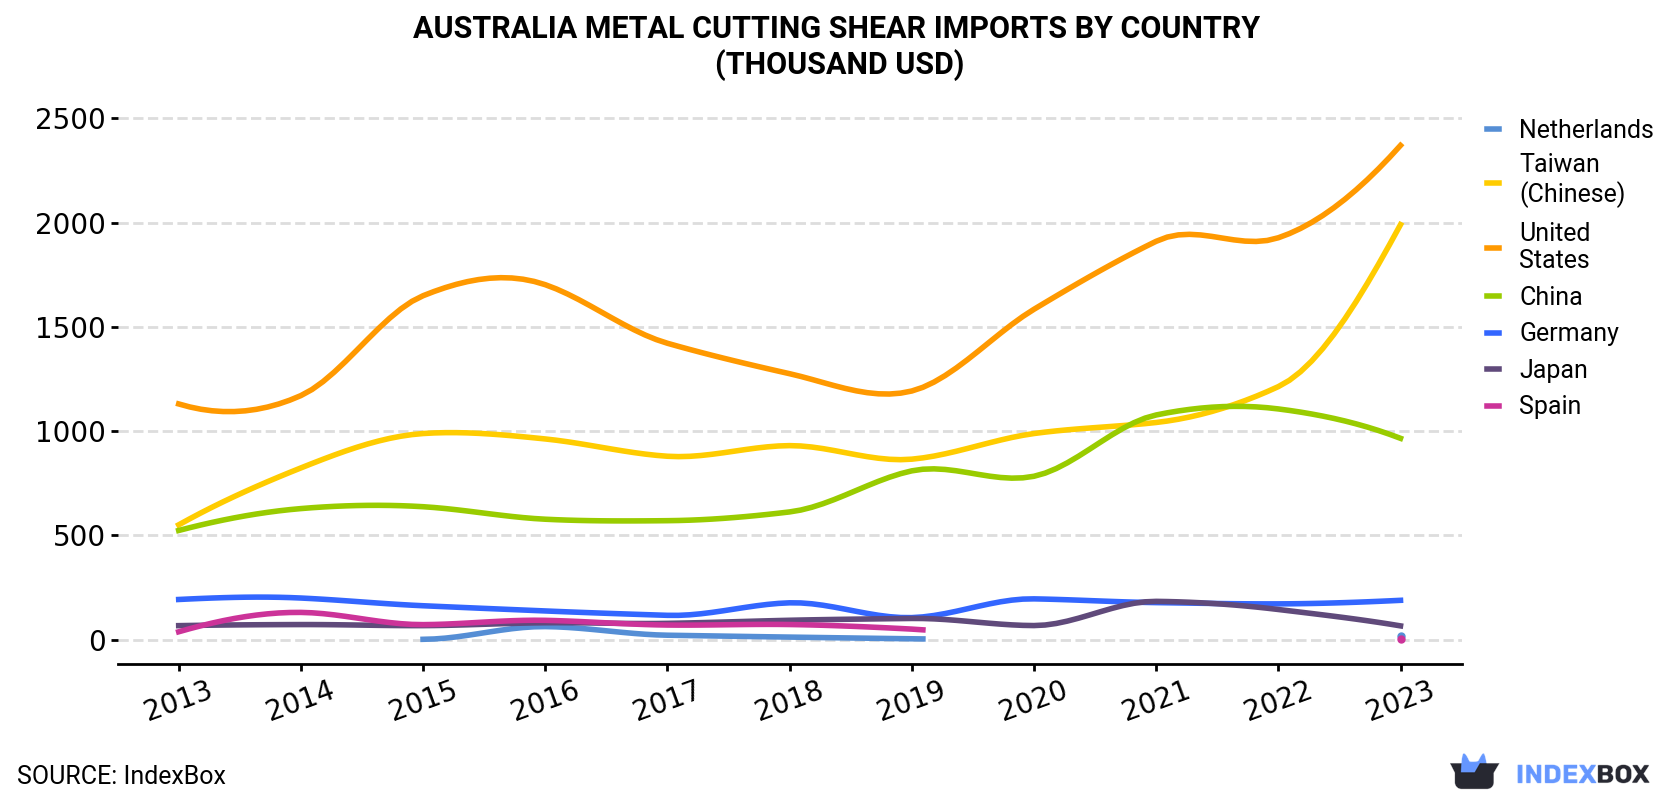 Australia Metal Cutting Shear Imports By Country (Thousand USD)